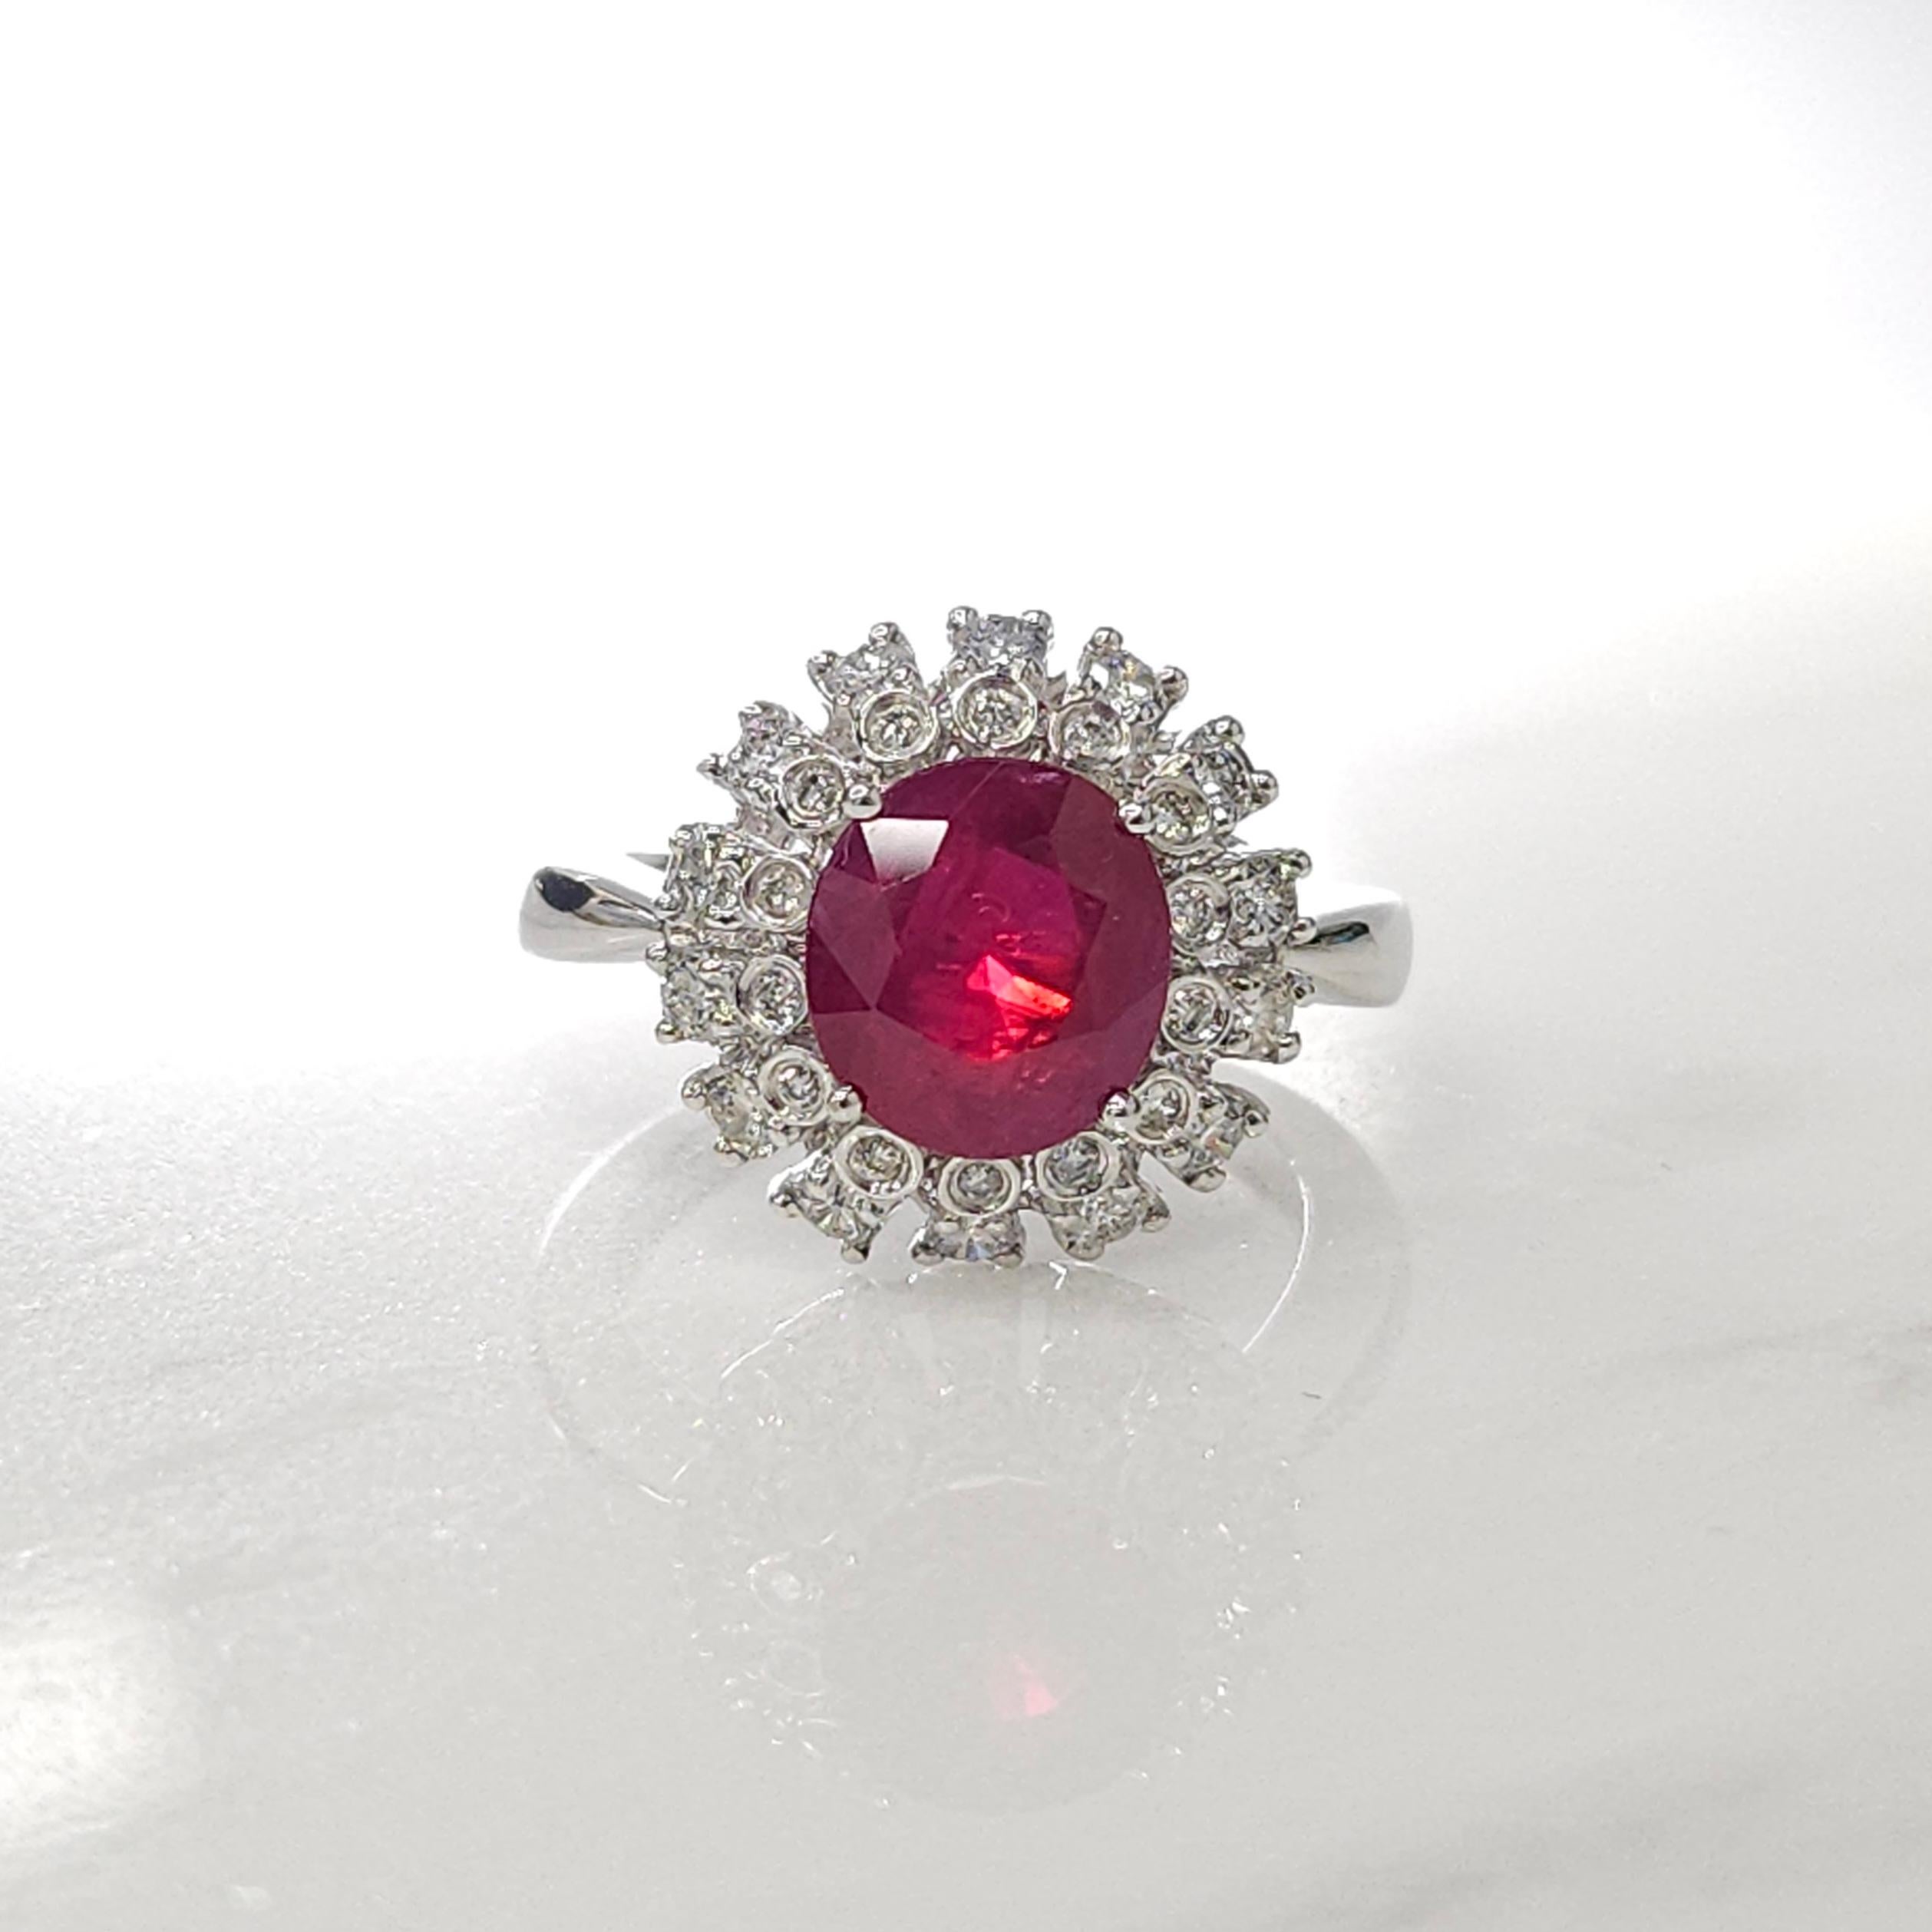 Oval Cut IGI Certified 2.91 Carat Ruby & Diamond Ring in 18K White Gold For Sale